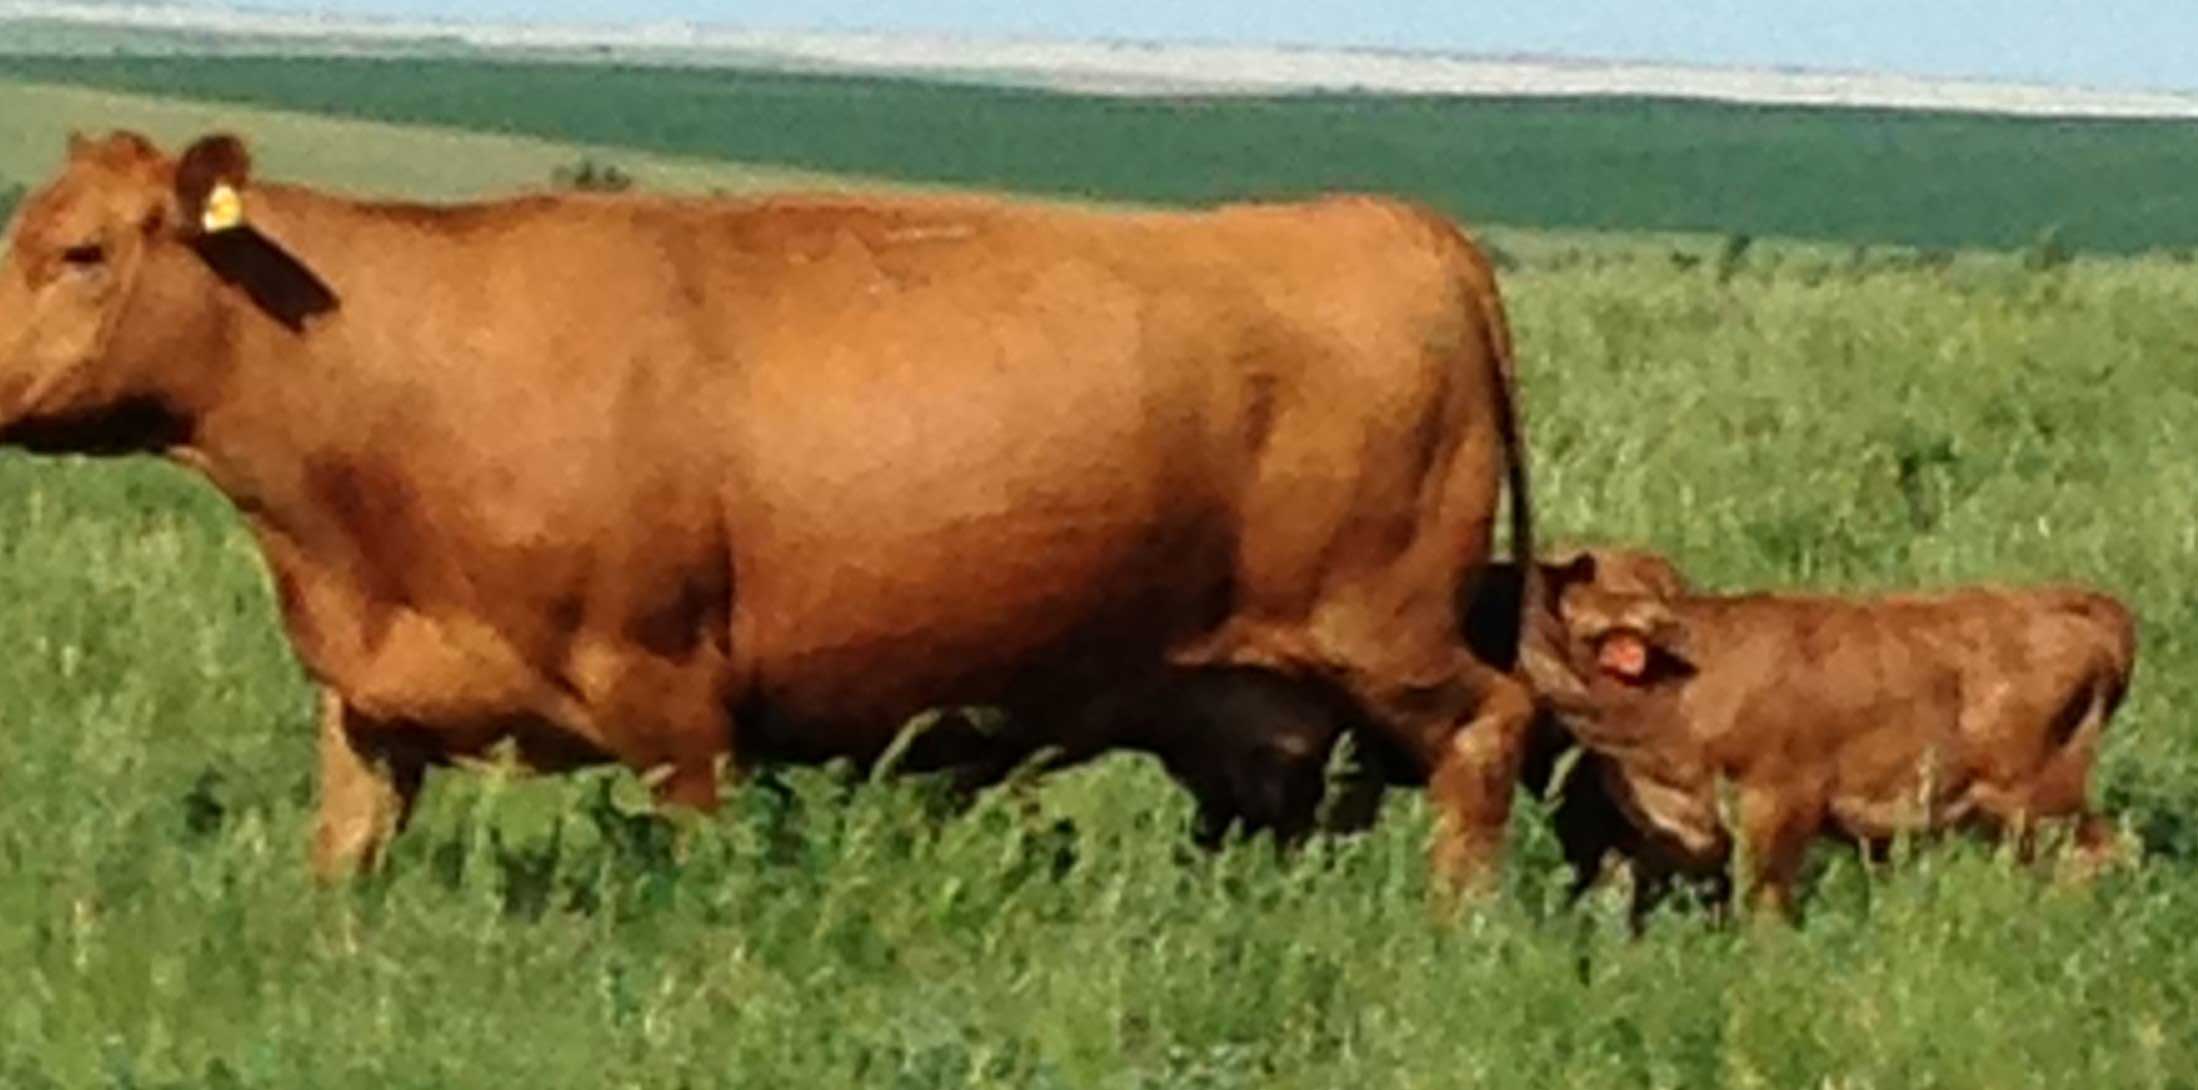 A red angus cow with two unweaned calves attempting to suckle from it.